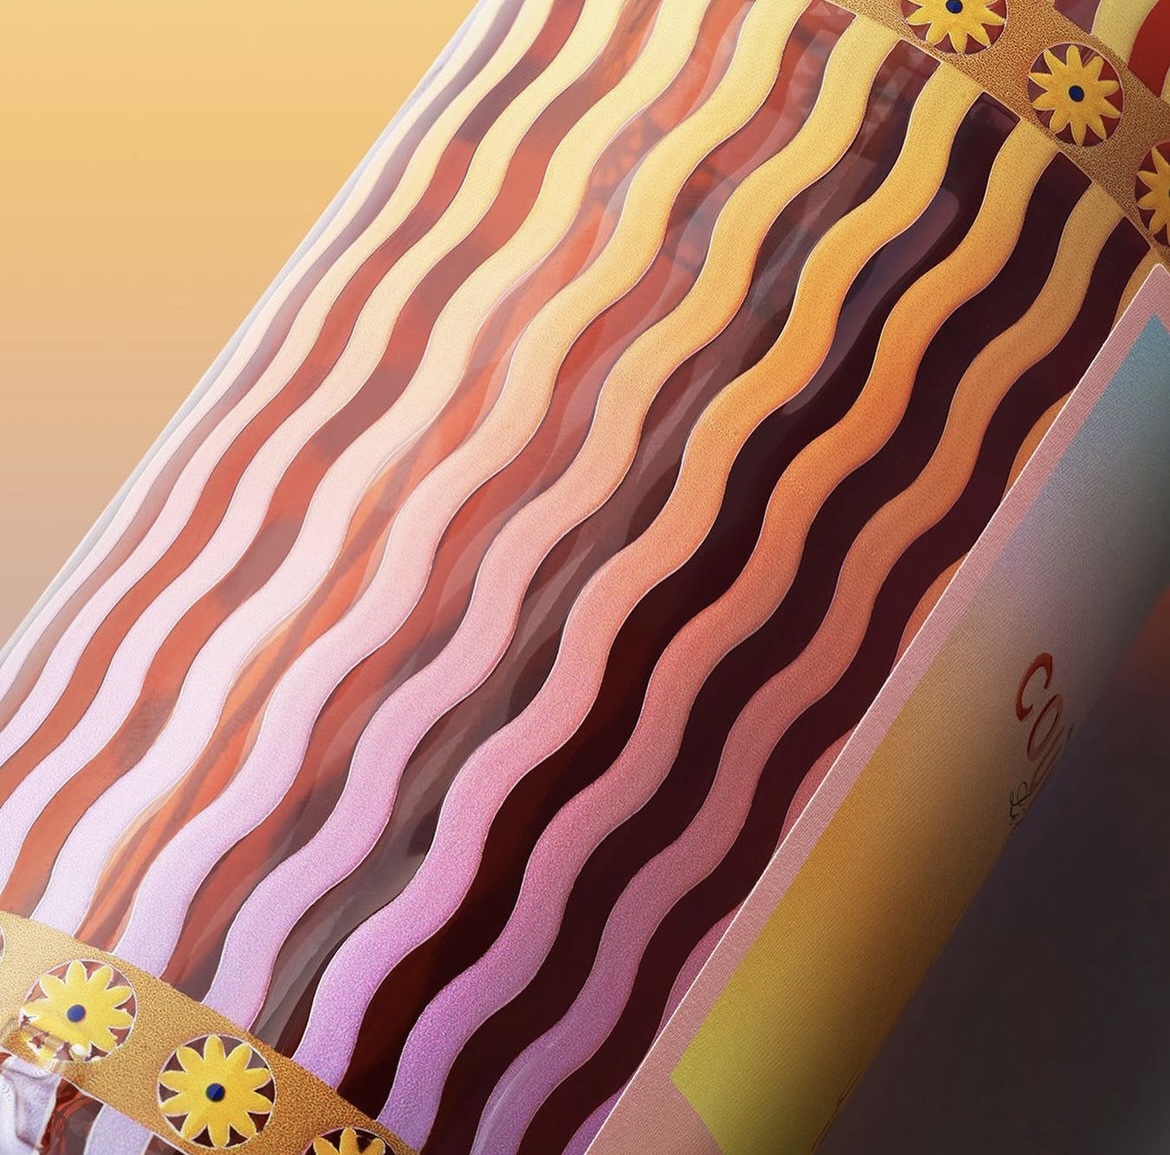 Courvoisier launched a gorgeous limited edition bottle made in collaboration with British Nigerian artist @YinkaIlori_. The bottle is a UK exclusive and will retail for £200 at Selfridges.